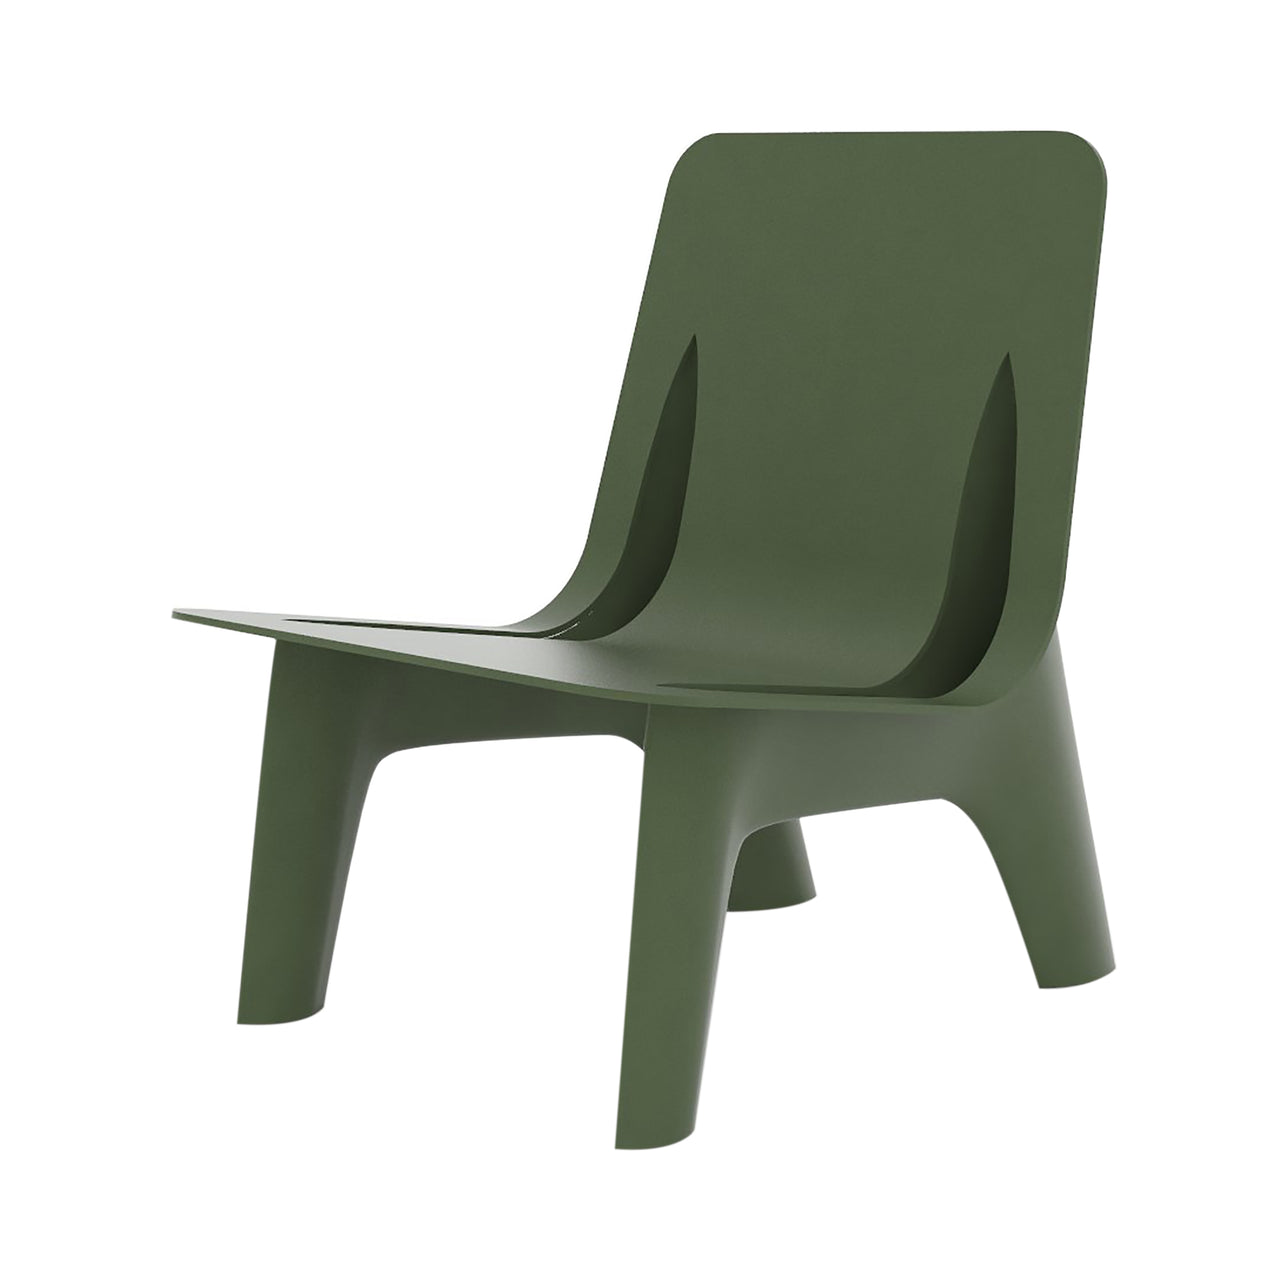 J-Chair Lounge: Olive Green